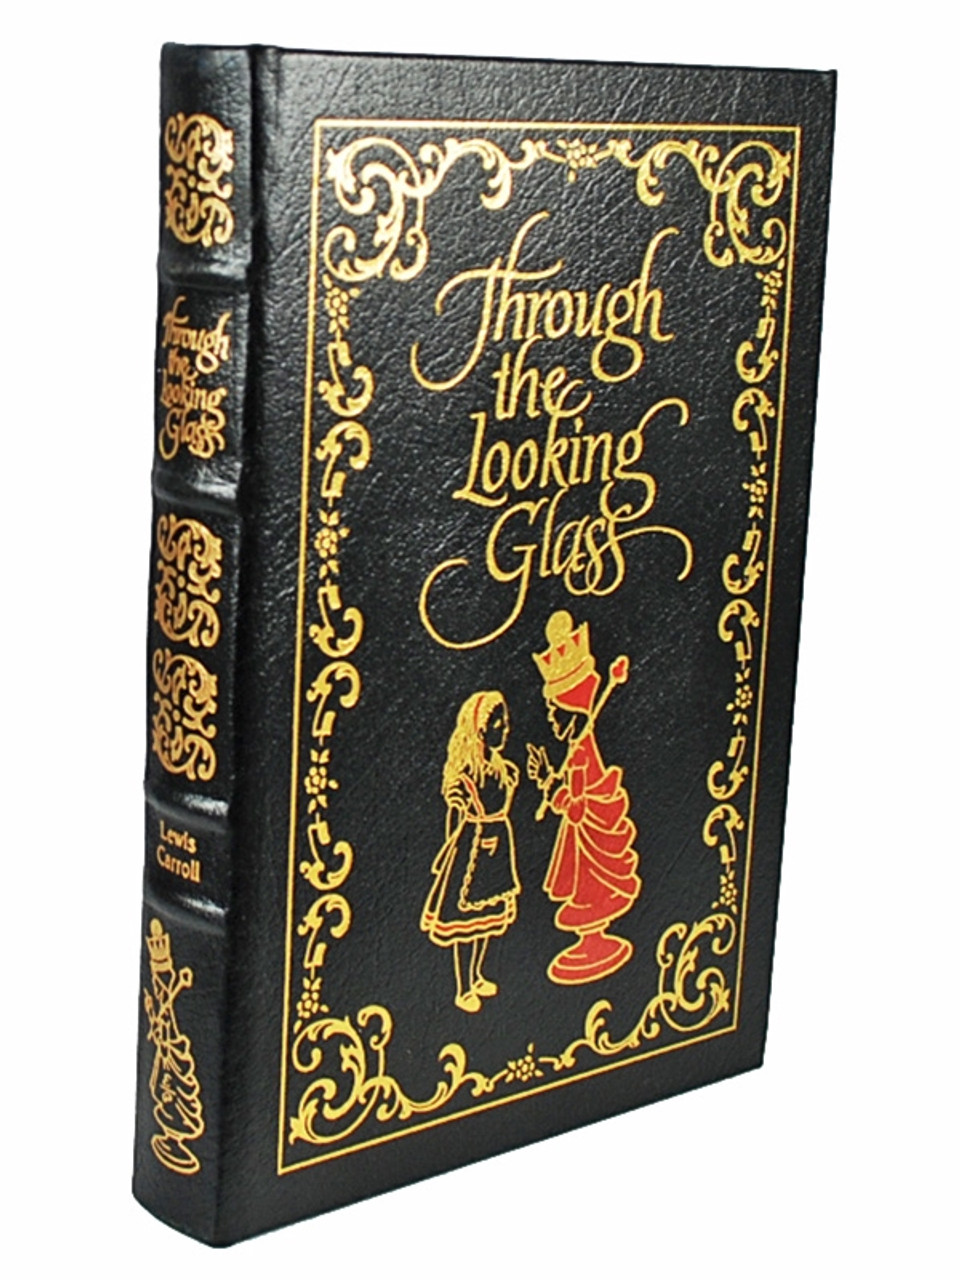 Easton Press "Through the Looking Glass and What Alice Found There" Lewis Carroll